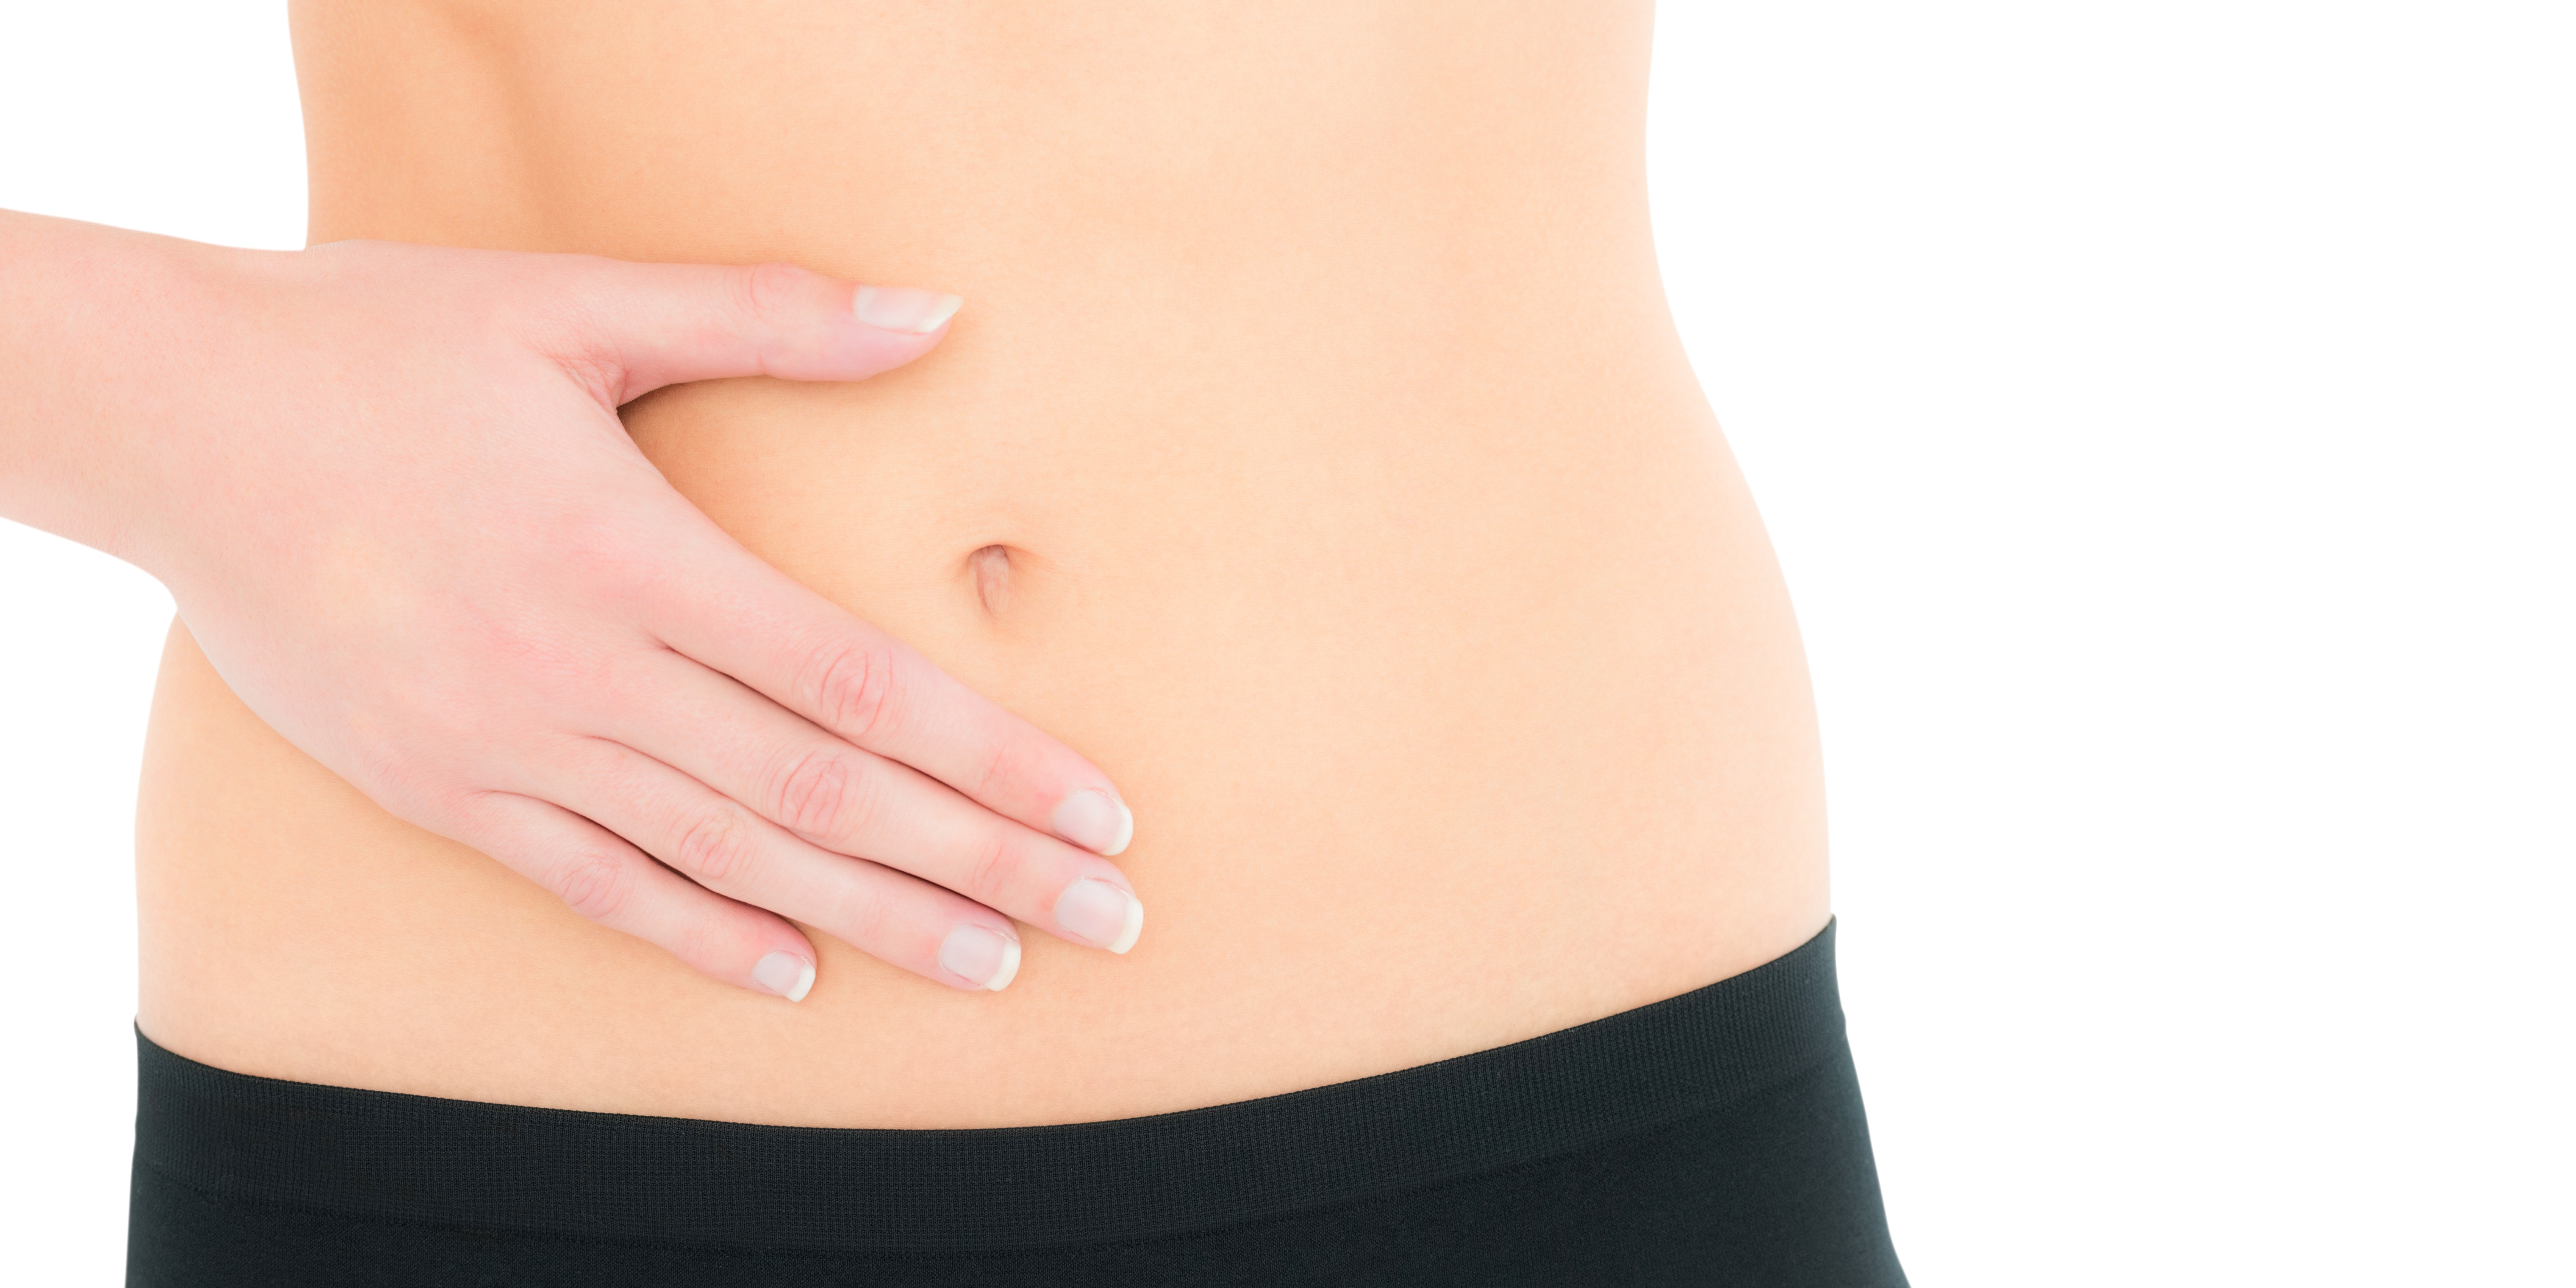 Are You Suffering with Pelvic Pain?